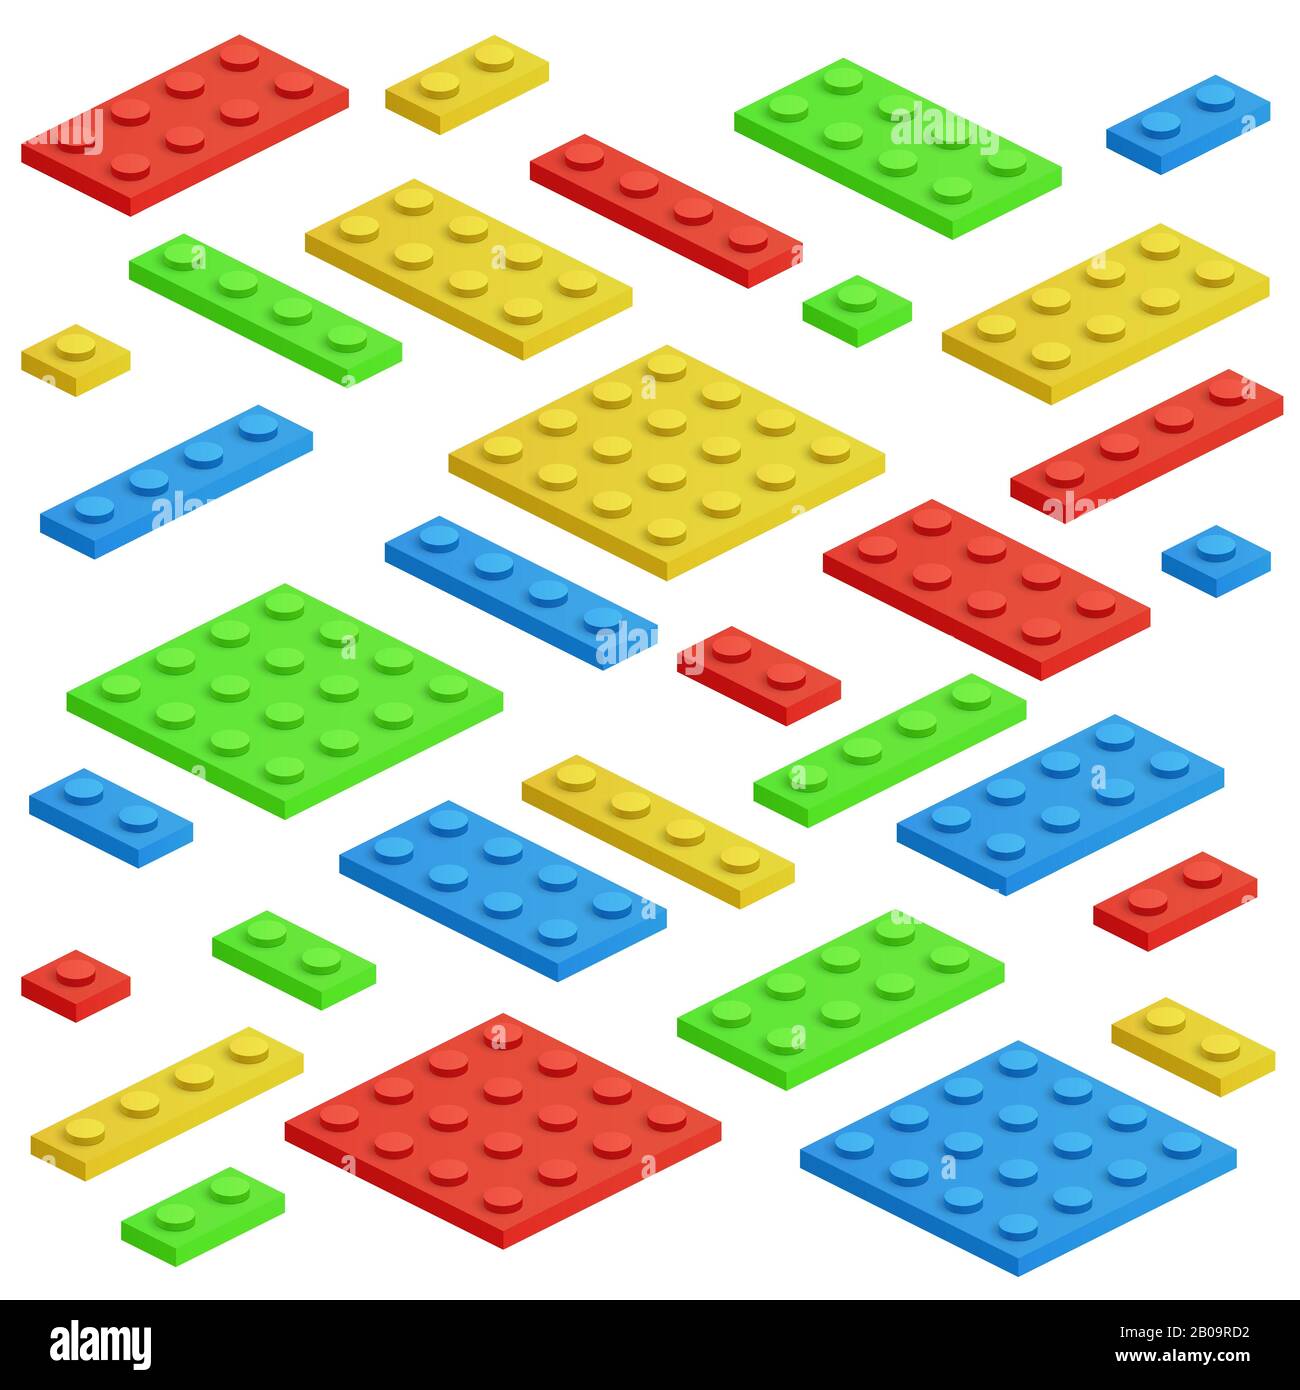 Isometric building block, toy kids bricks vector set. Toy block construction, illustration of cube toy for play Stock Vector